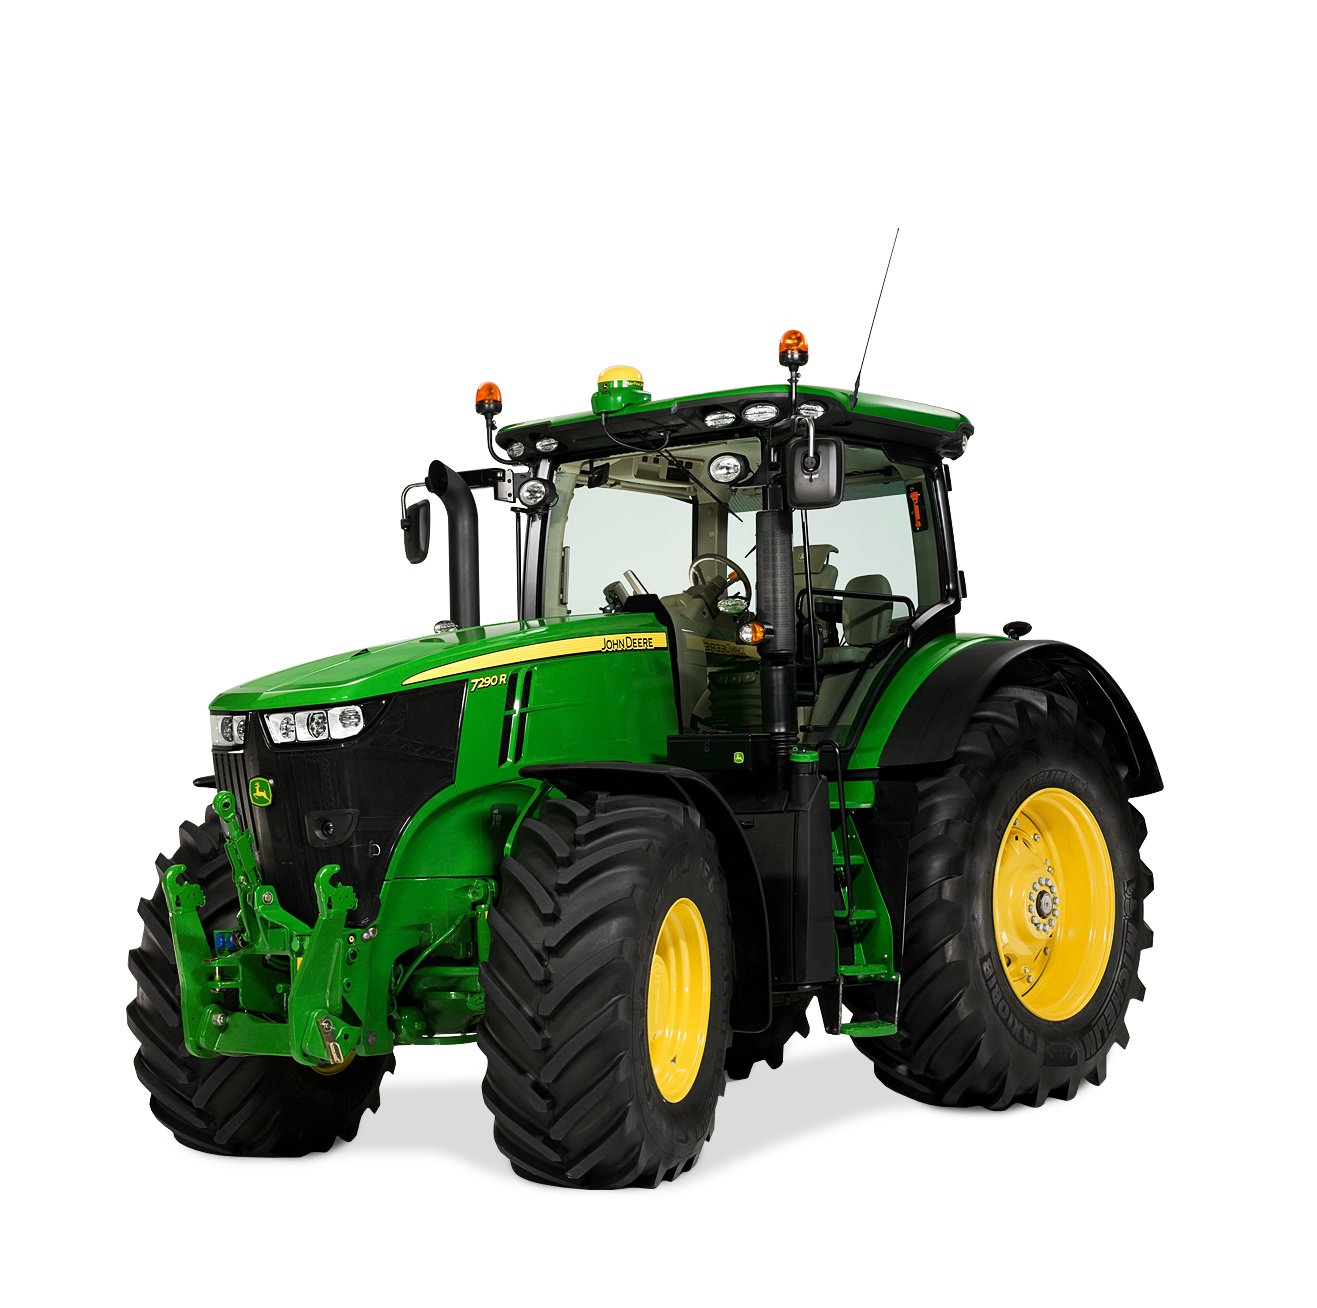 THE ALL NEW 7R/8R SERIES TRACTORS